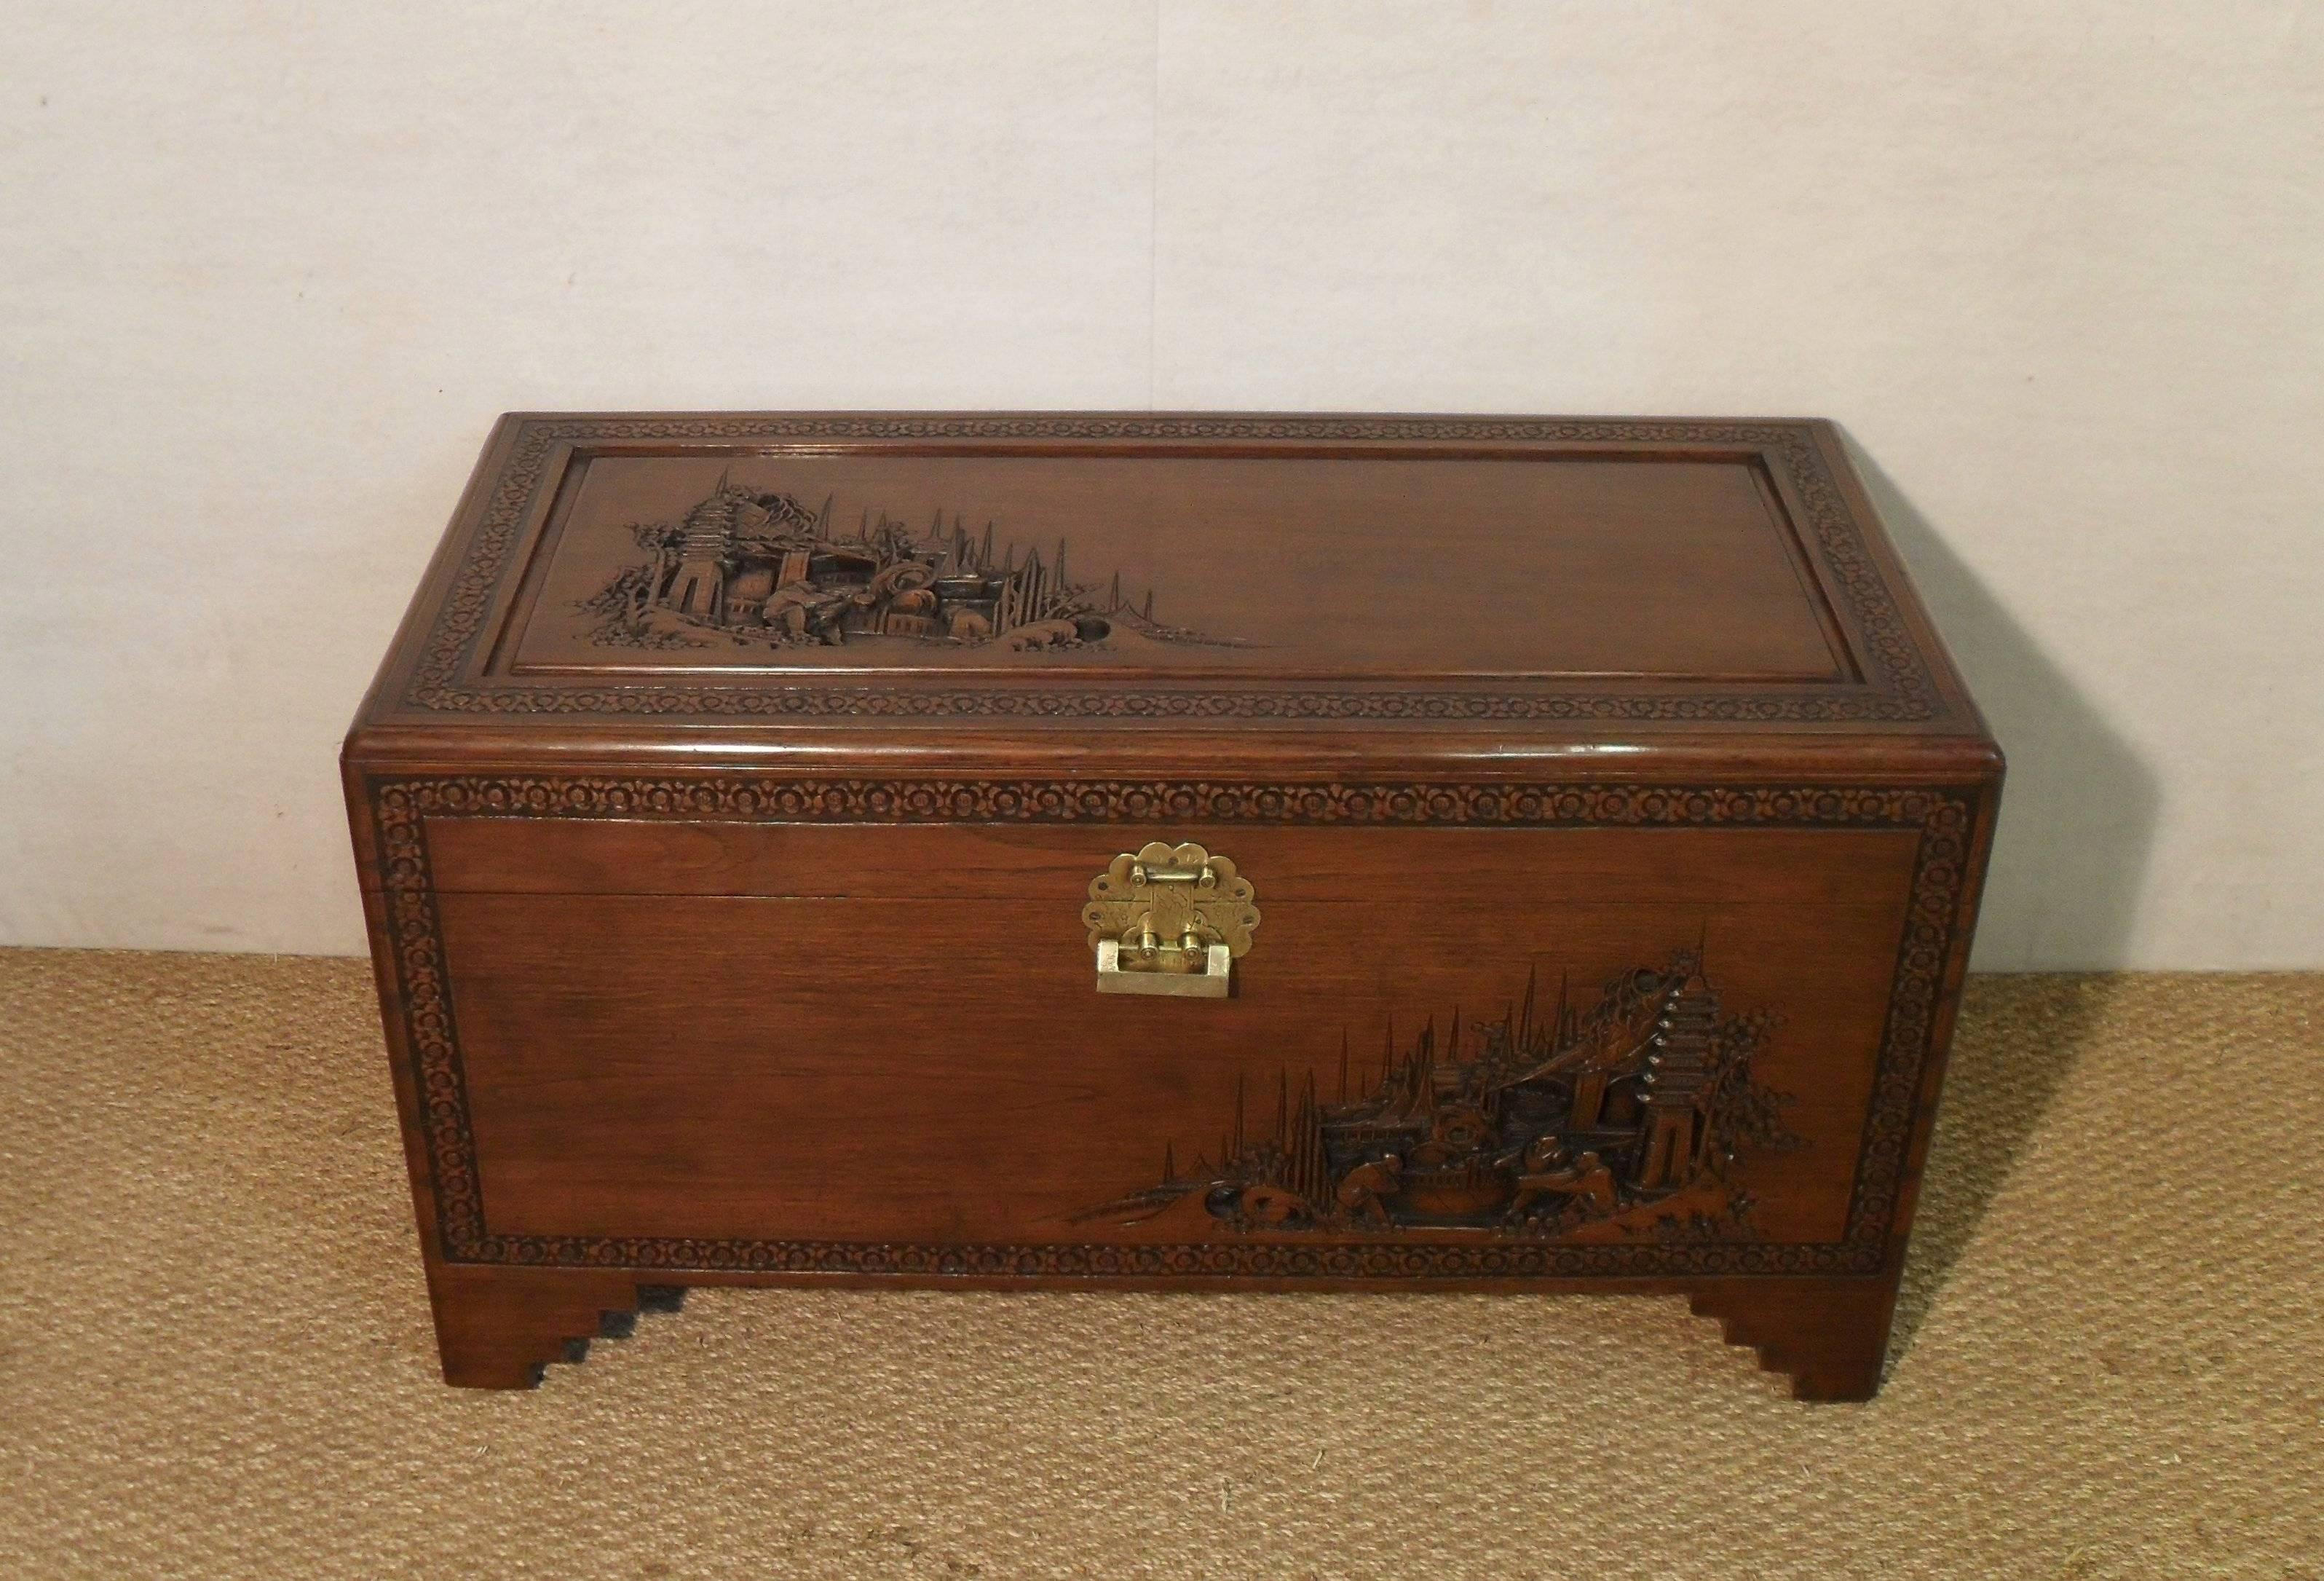 A good quality oriental camphor wood chest on stepped bracket feet with detailed landscape carvings and carved floral border to the front and top.

The chest retains its original decorative engraved brass back plate and latch and comes with a